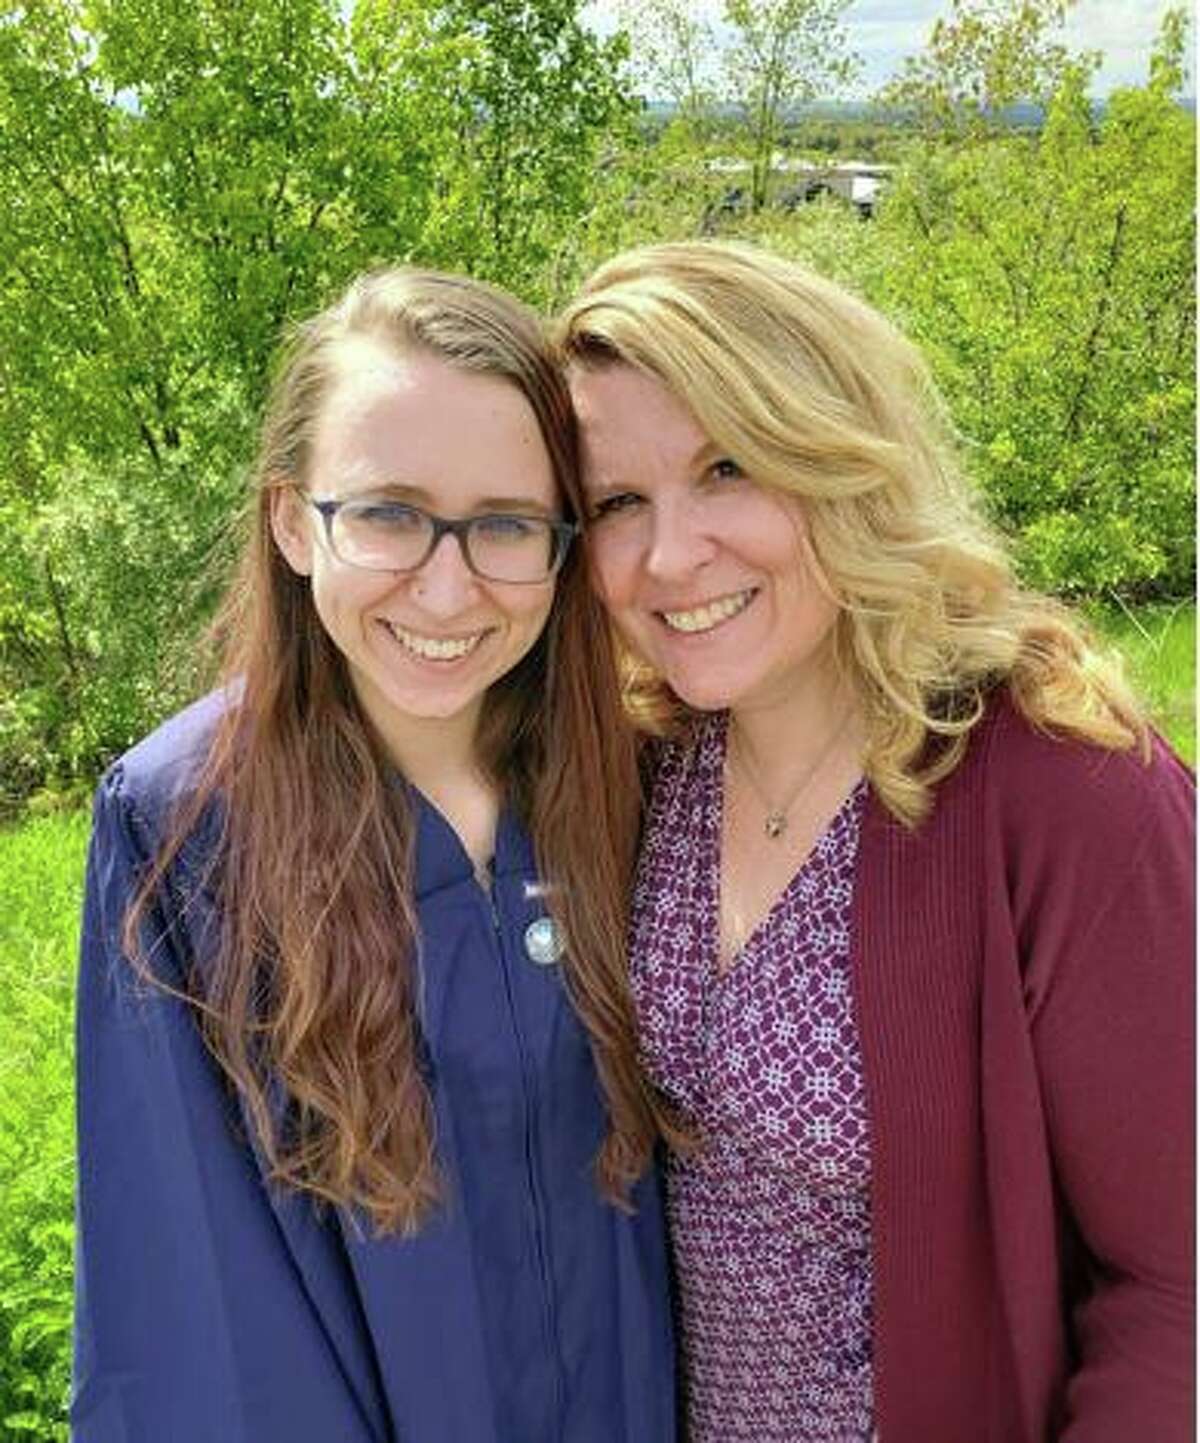 When her daughter, Alexandra, came out as a ninth-grader years ago, Greenwich resident Karen Hasterok said she made it a mission to not just support her daughter but help other youth who might not have the same support Alexandra did. Now Hasterok works for the Triangle Community Center in Norwalk and is concerned about new laws taking away LGBTQ+ rights.